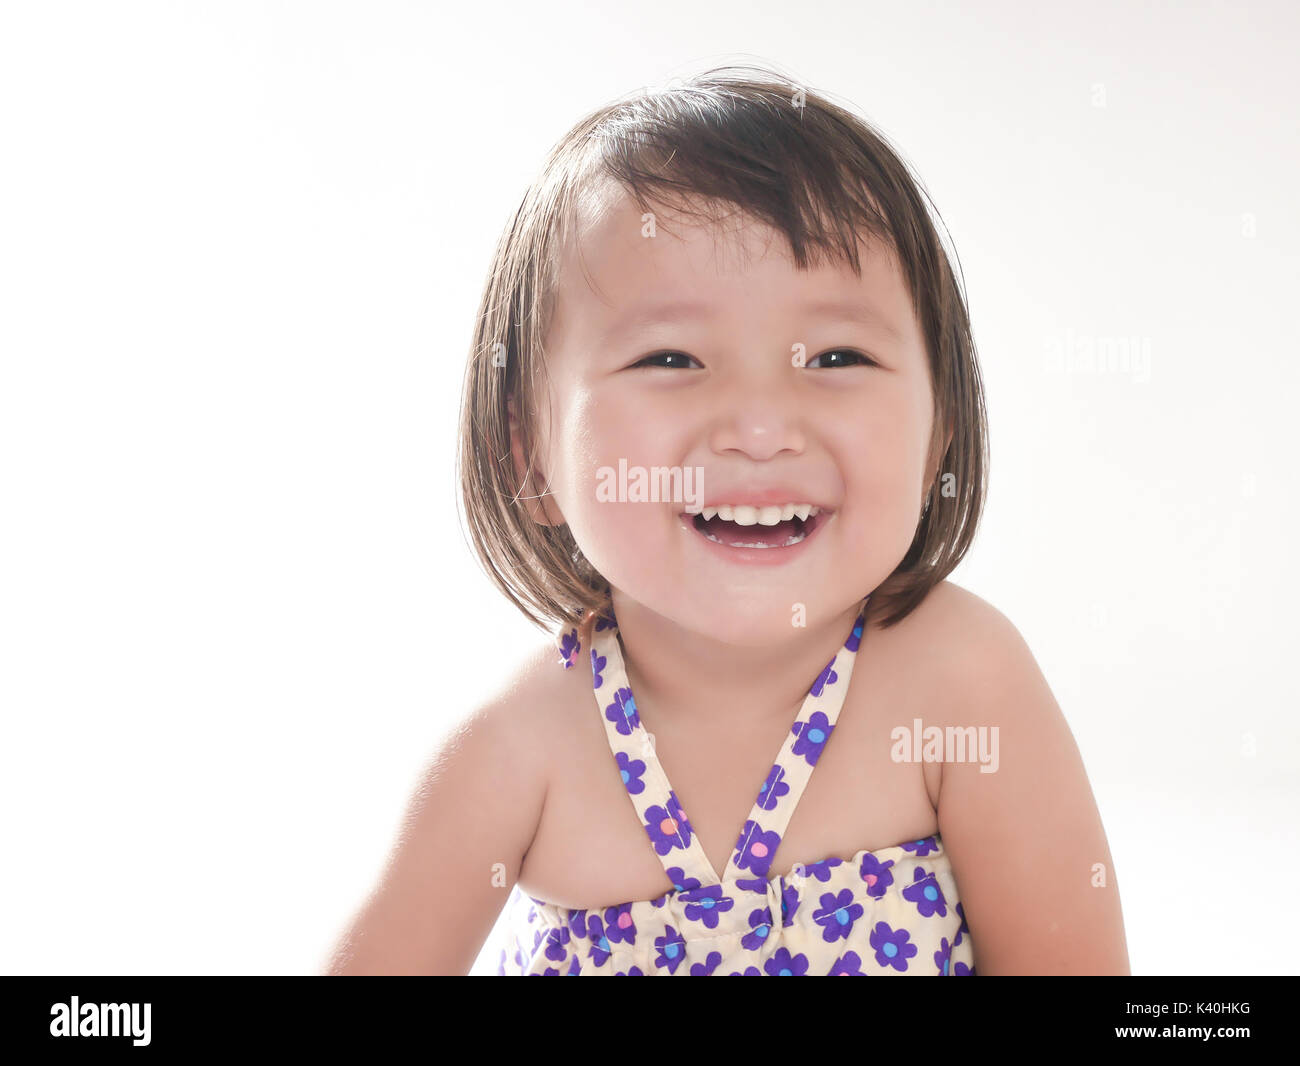 Portrait of 2 year old little girl , Smiling face on bright white background Stock Photo